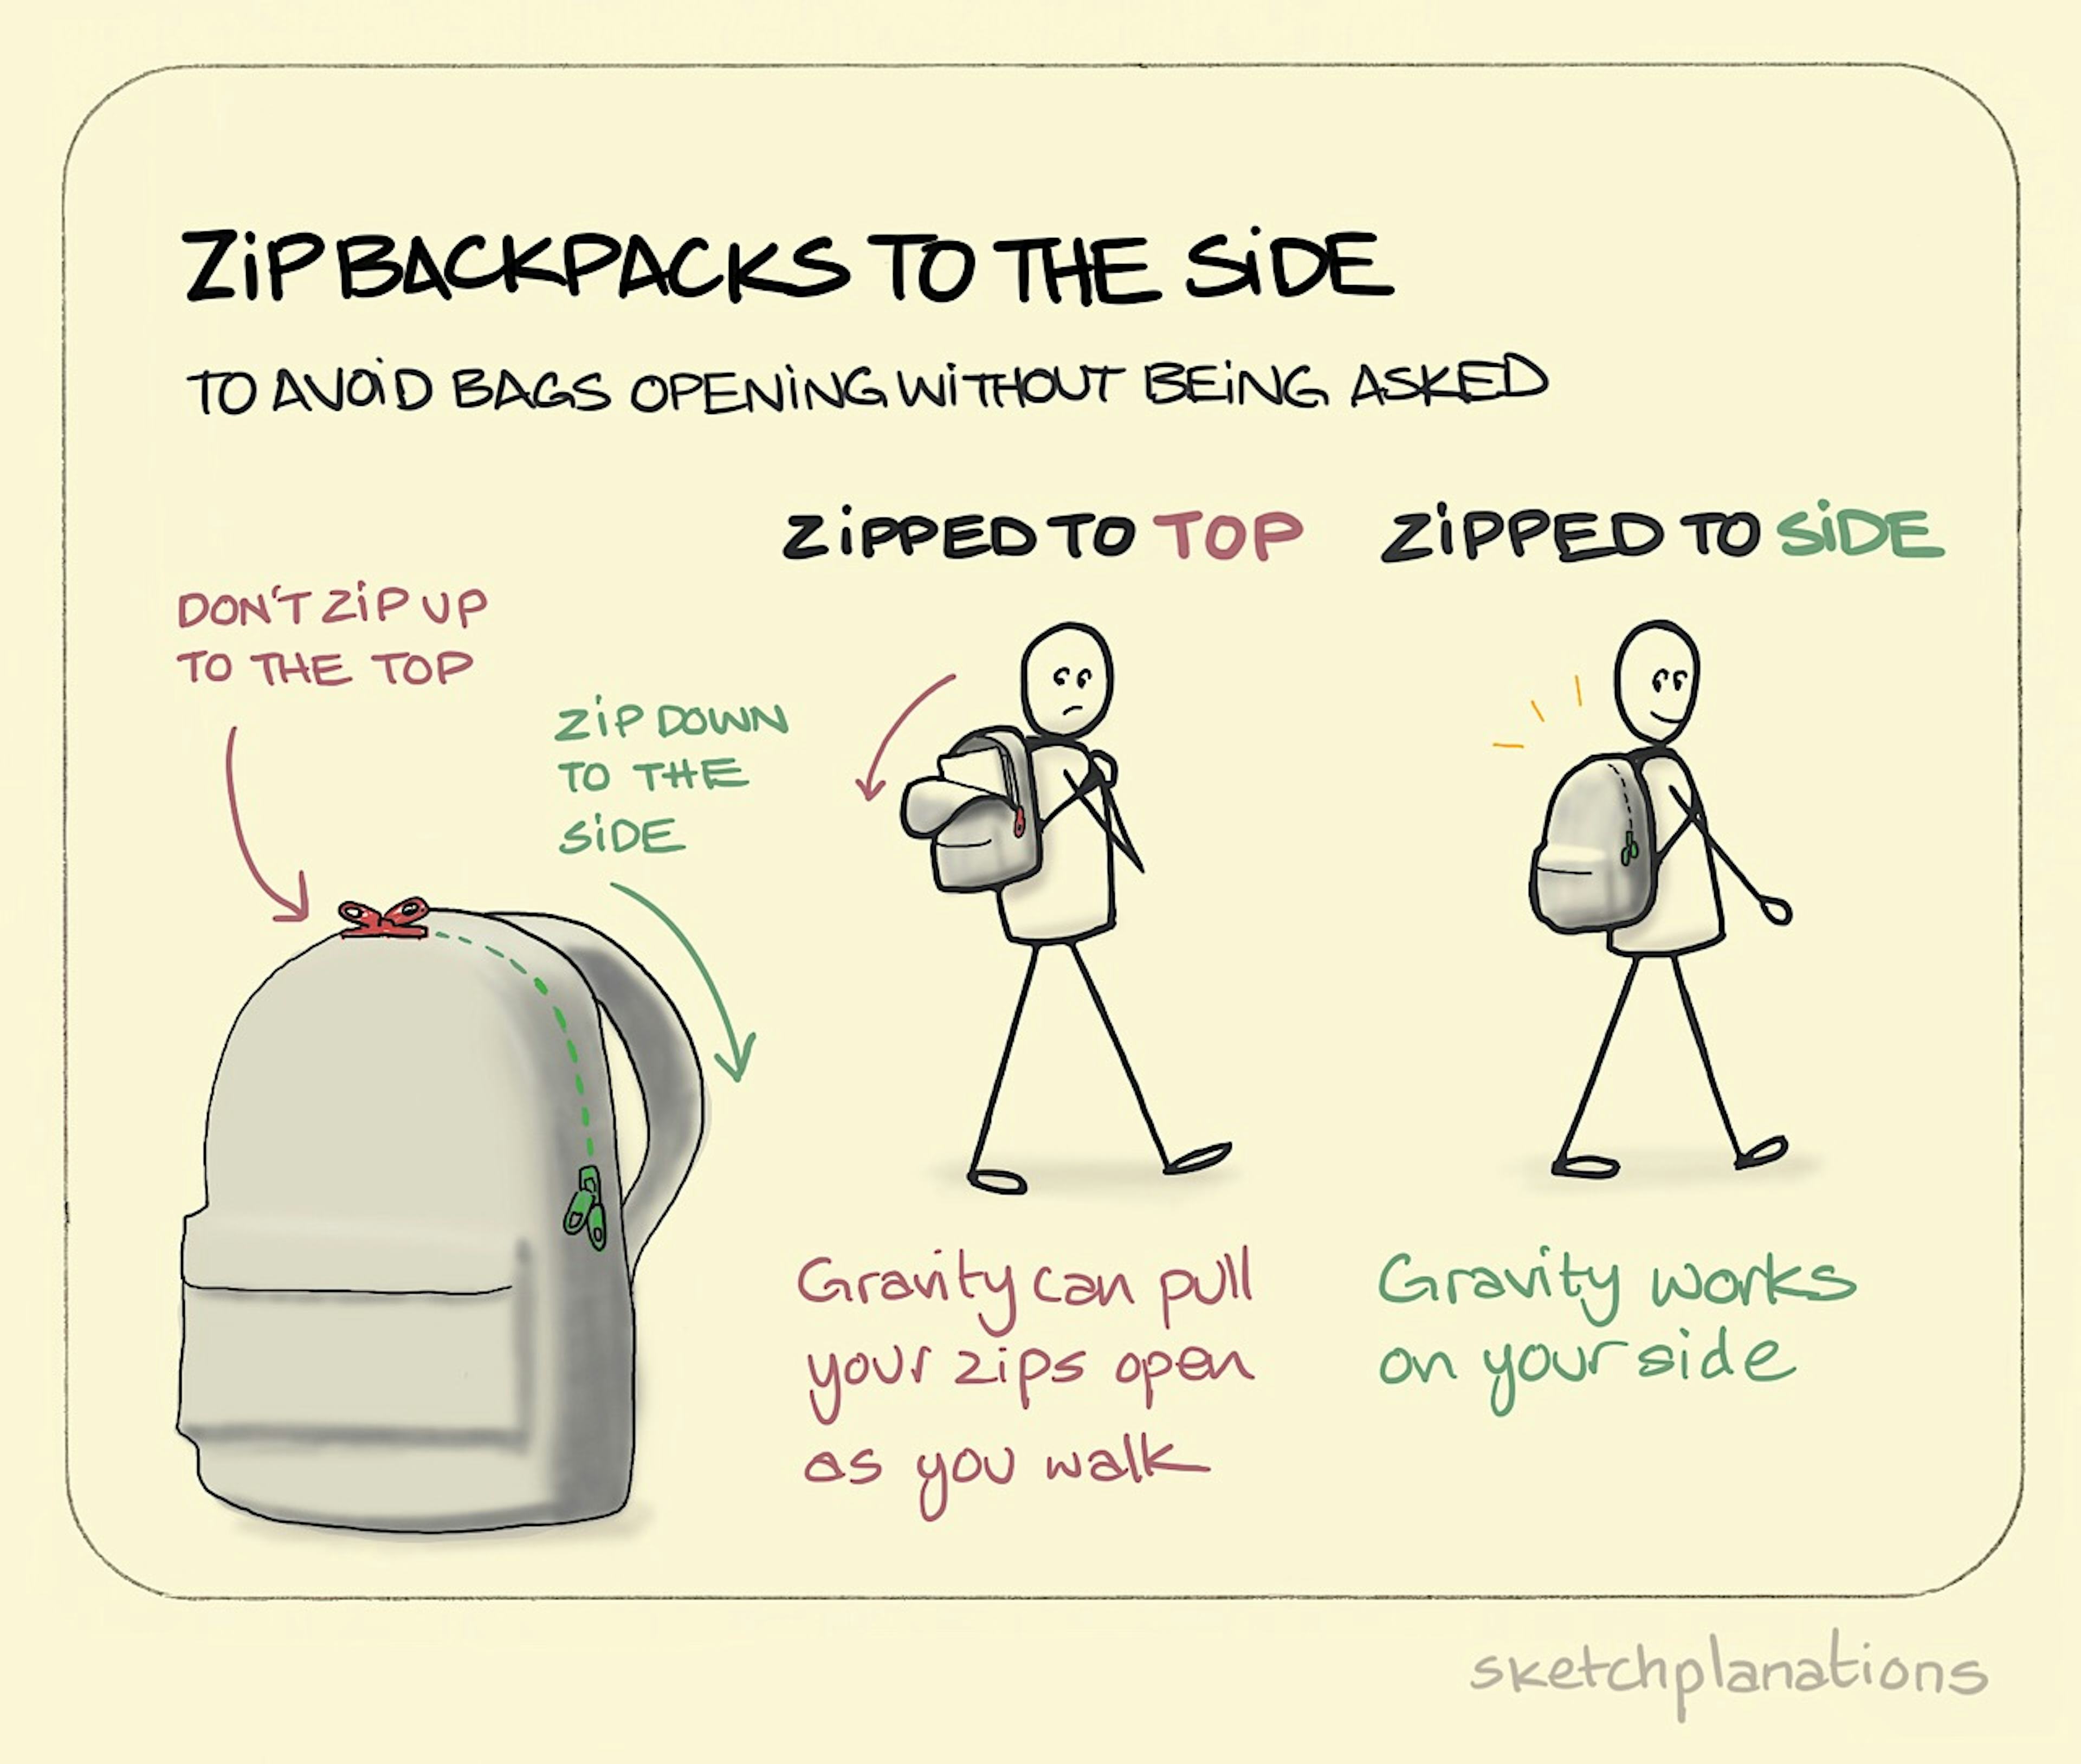 Zip backpacks to the side illustration: with double-ended zips, one person's backpack has peeled itself open (both zips closed up to the top), while another's remains safely zipped up (one zip brought right round to join the other)..  